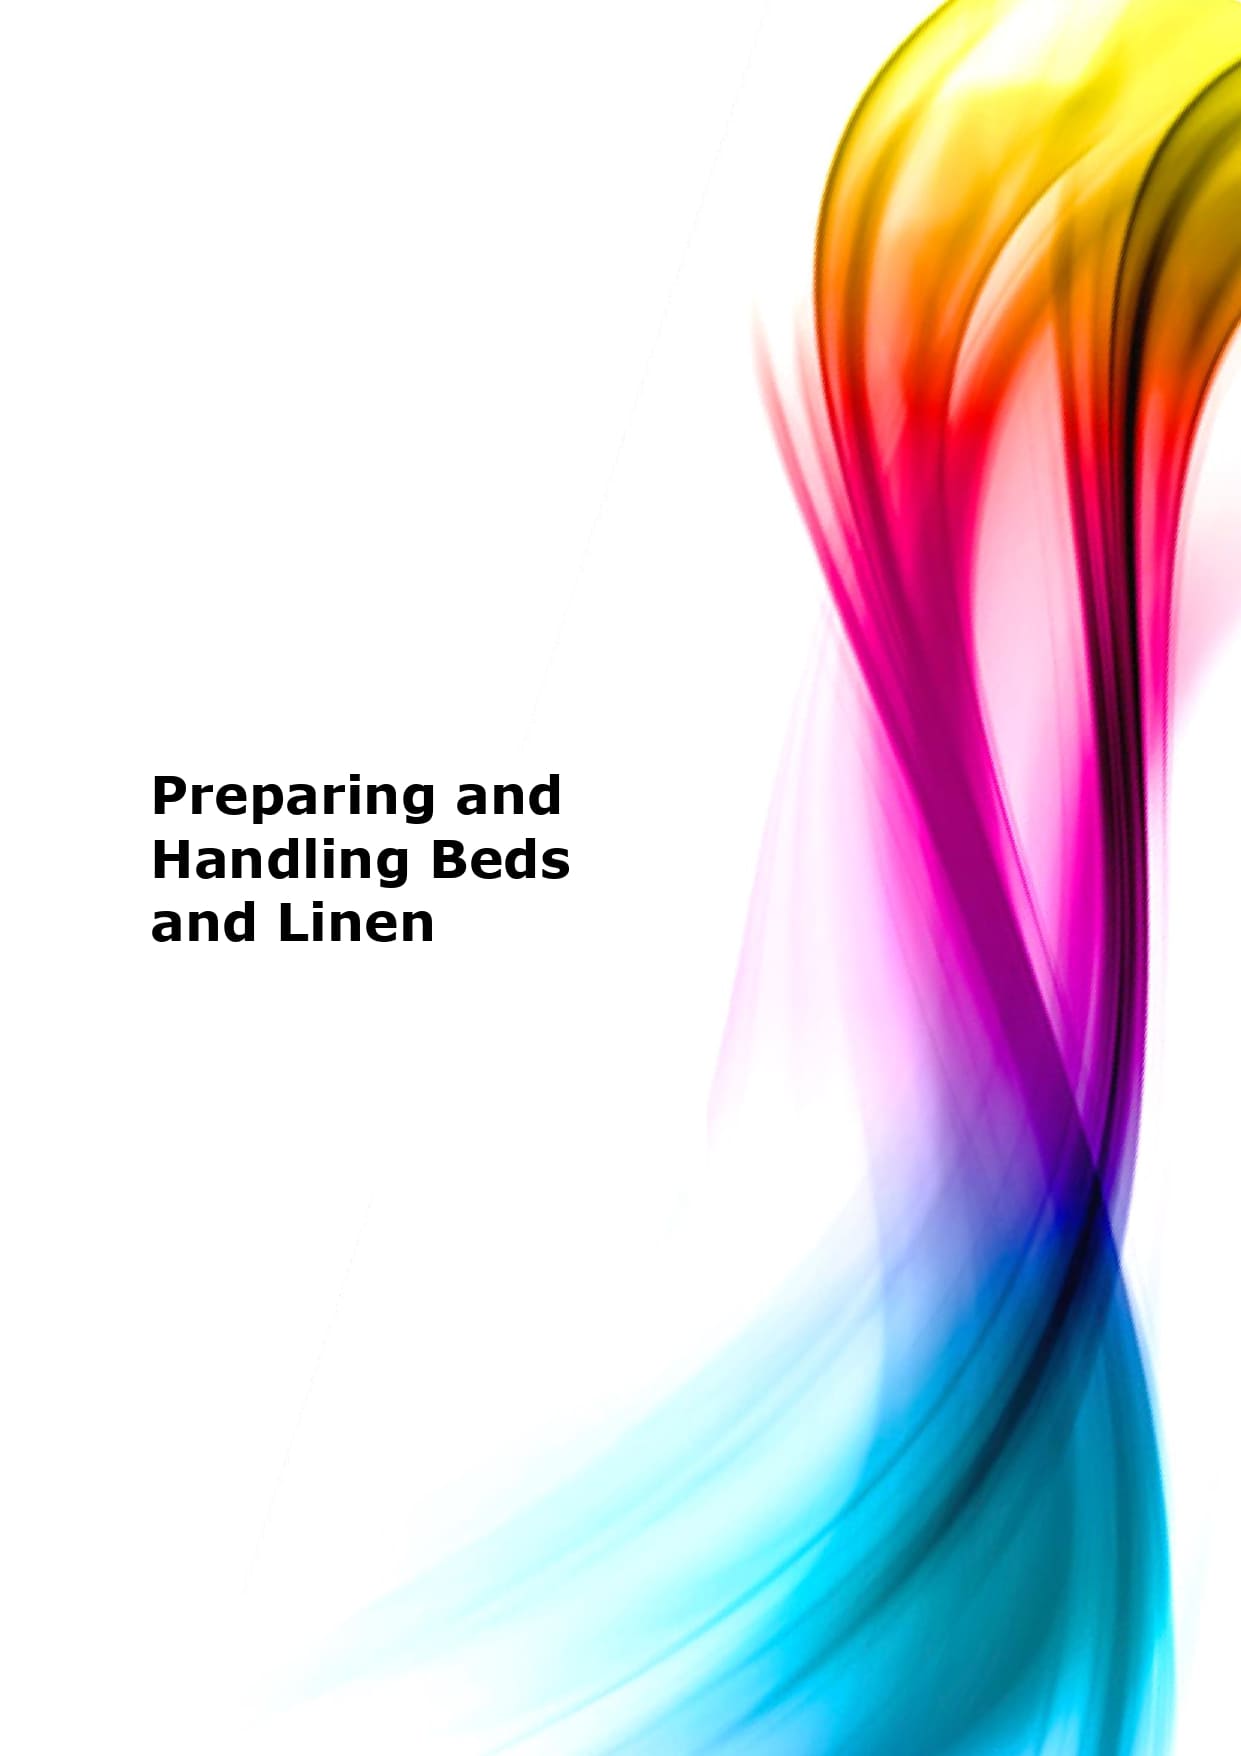 Preparing and handling beds and linen